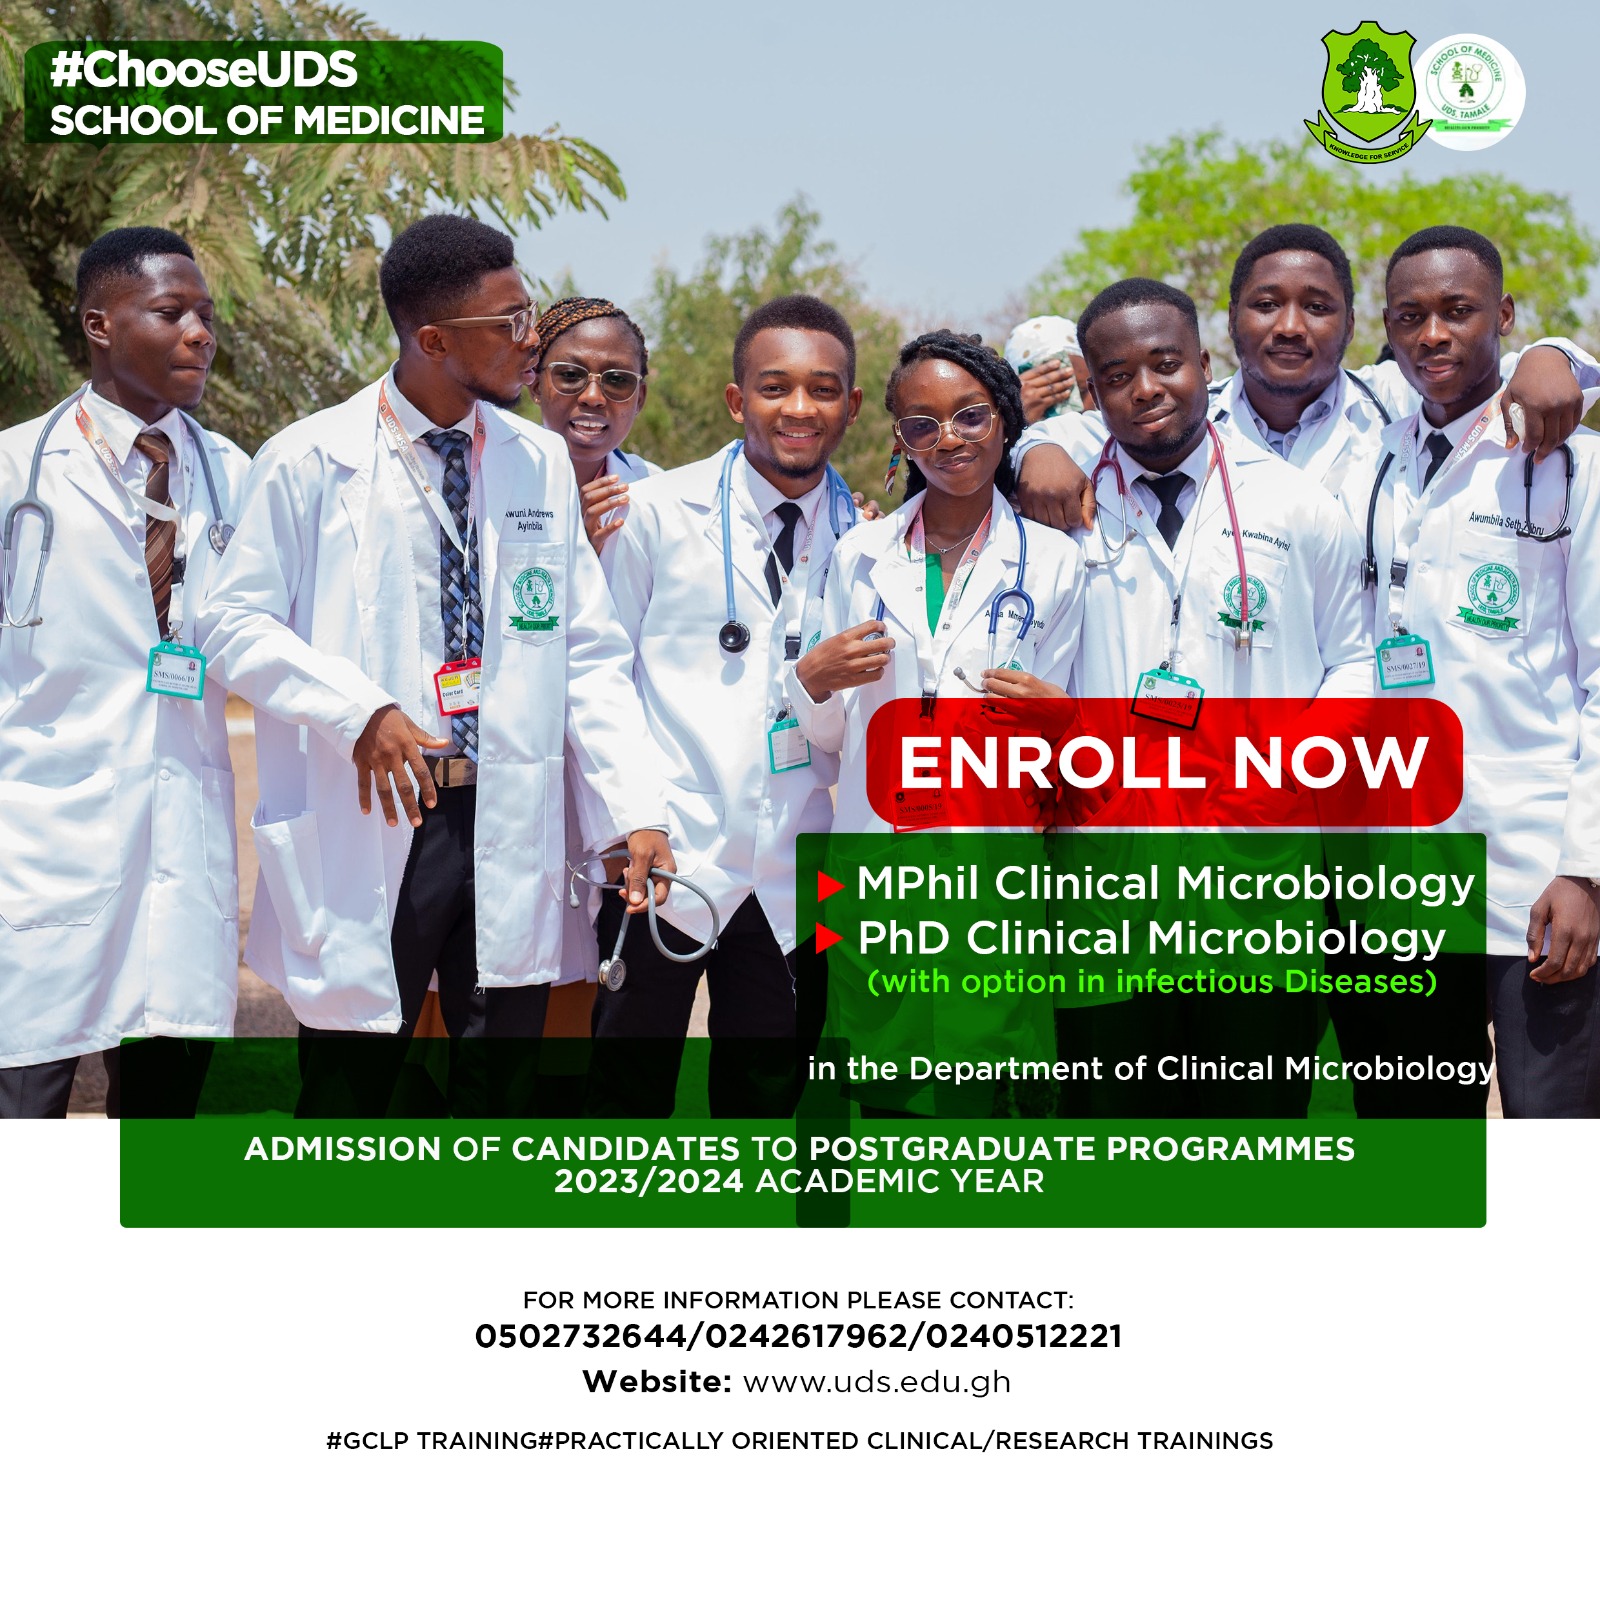 Exciting Opportunities Await! Enroll Now at UDS Medical School Postgraduate Programmes